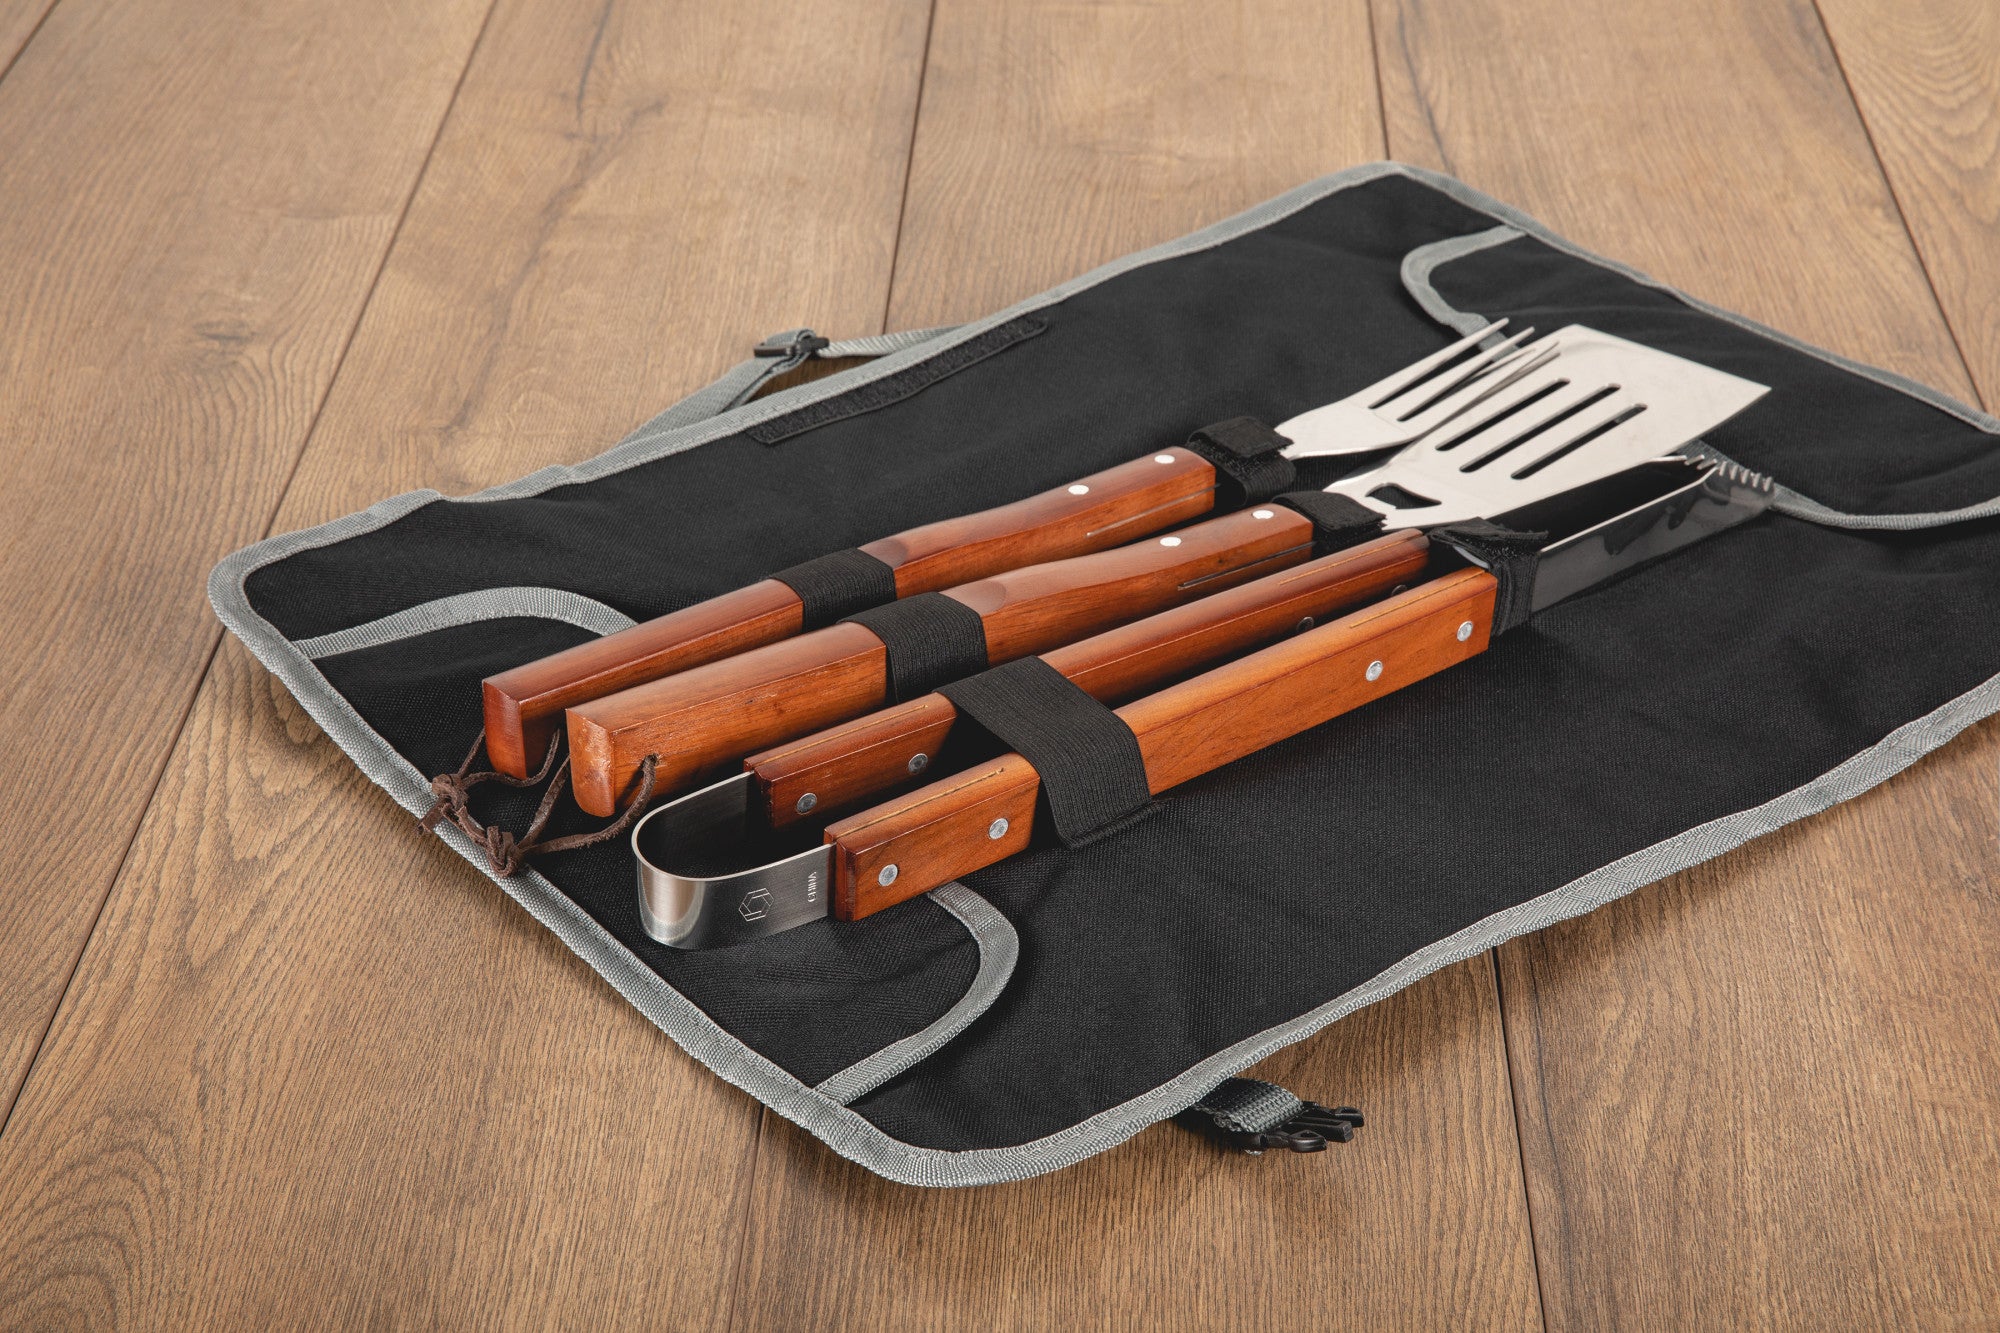 Wisconsin Badgers - 3-Piece BBQ Tote & Grill Set